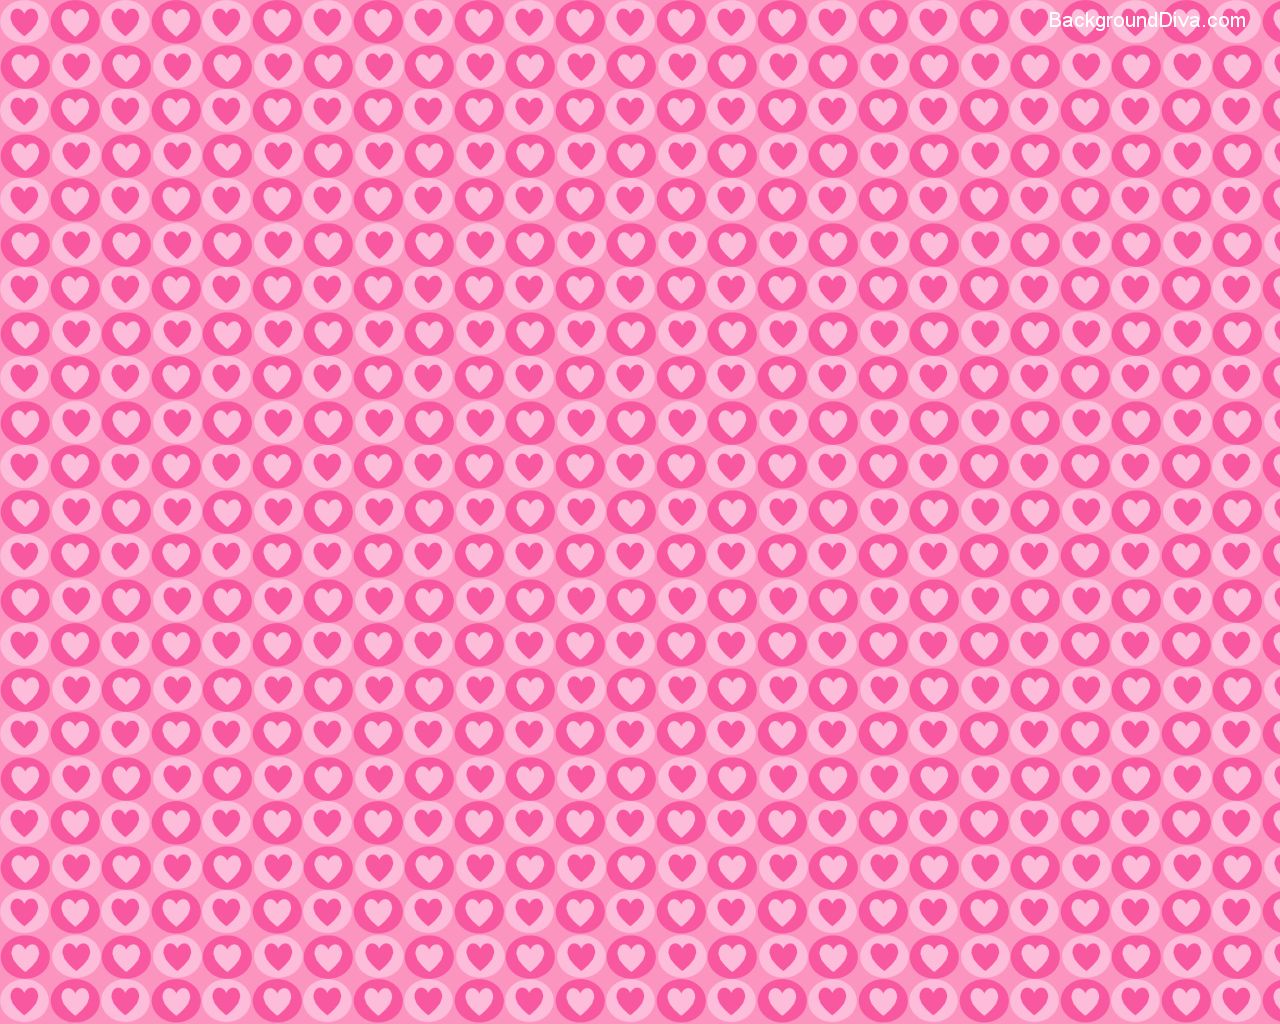 Wallpapers Pink